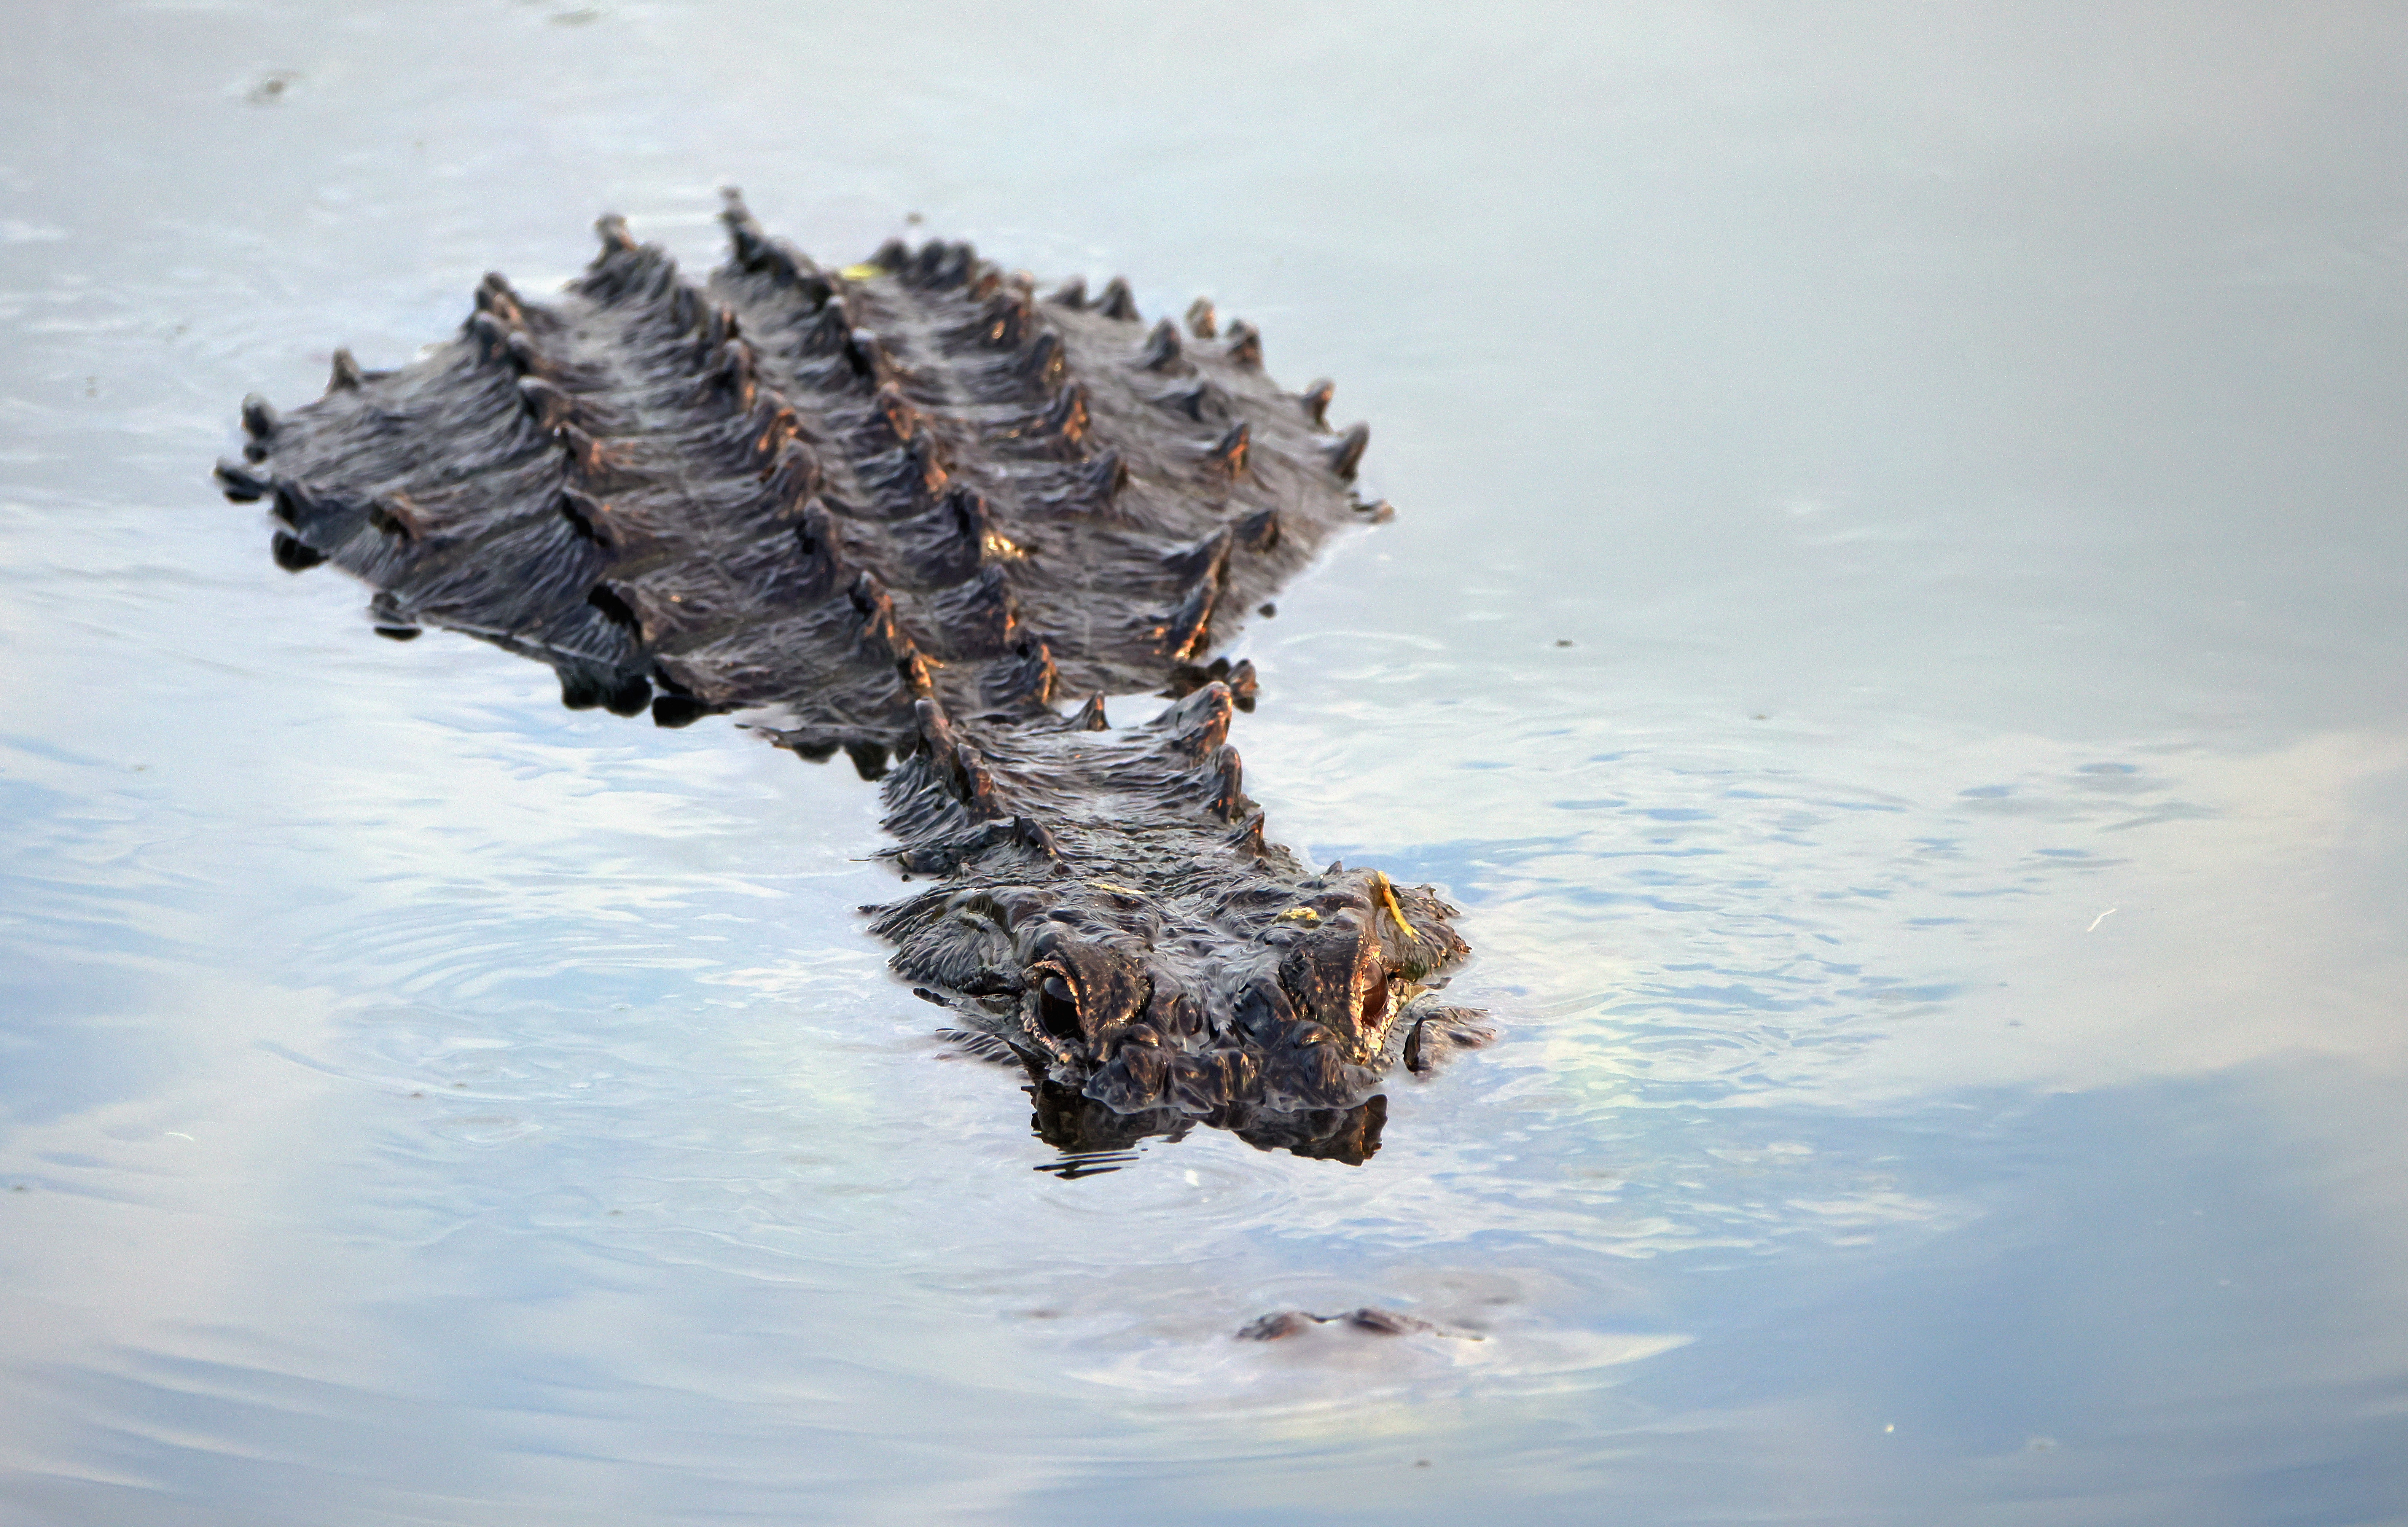 DELRAY BEACH, FLORIDA - JULY 09: An alligator navigates the waterway at the Wakodahatchee Wetlands on July 09, 2021 in Delray Beach, Florida. (Photo by Bruce Bennett/Getty Images)